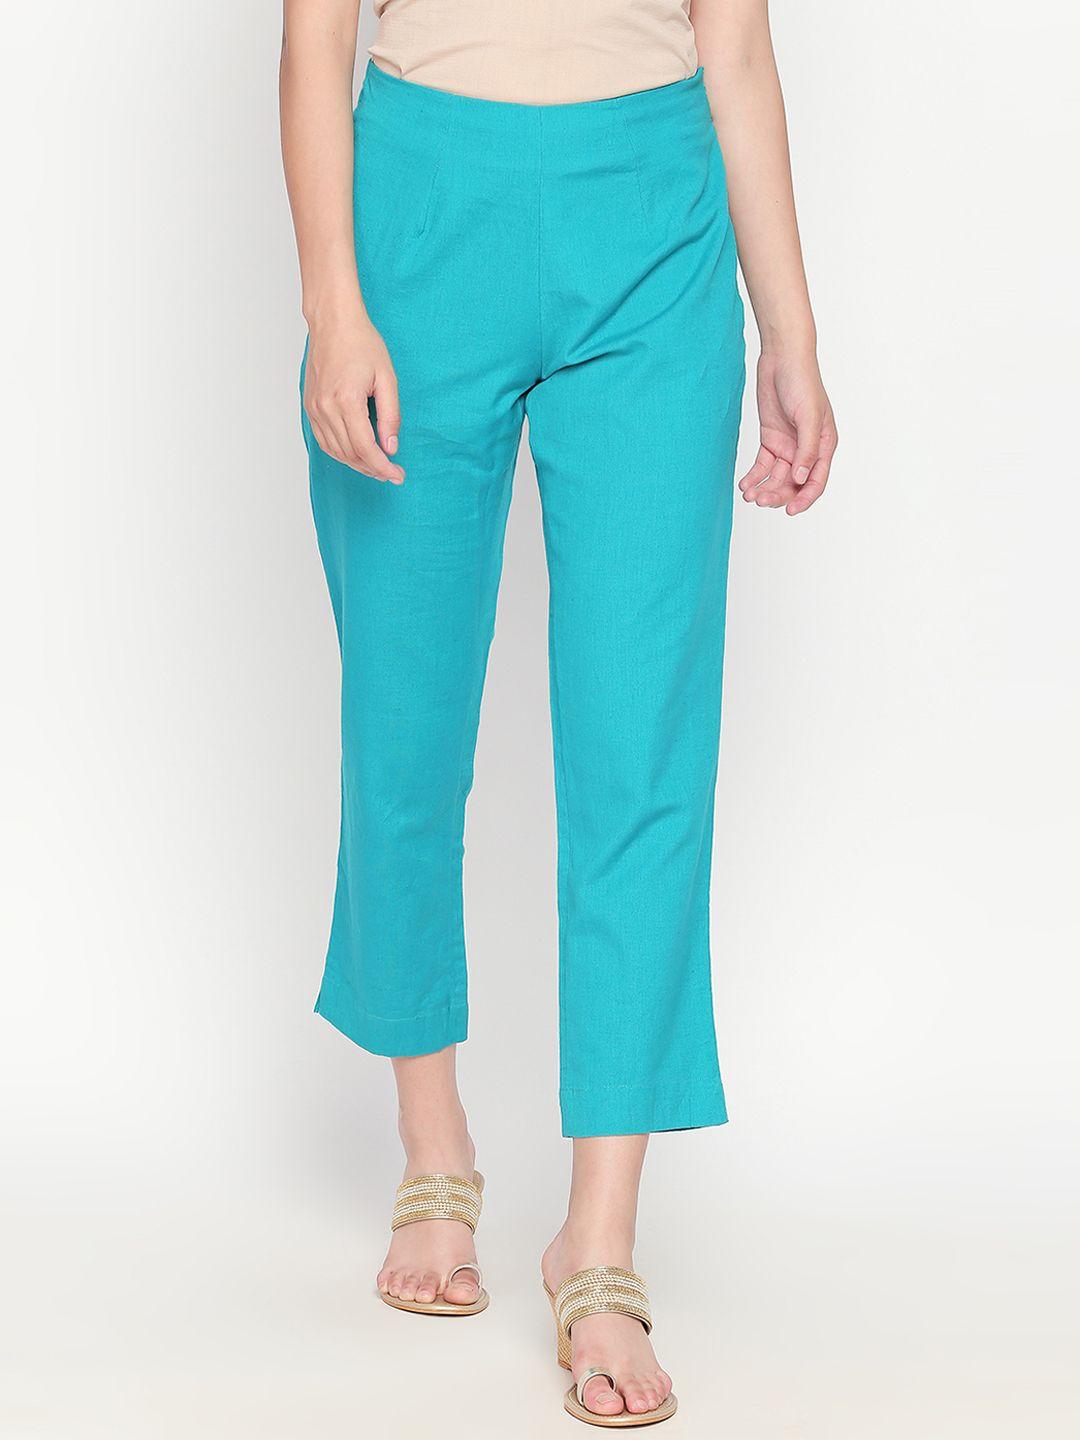 rangmanch by pantaloons women turquoise blue regular fit solid regular trousers